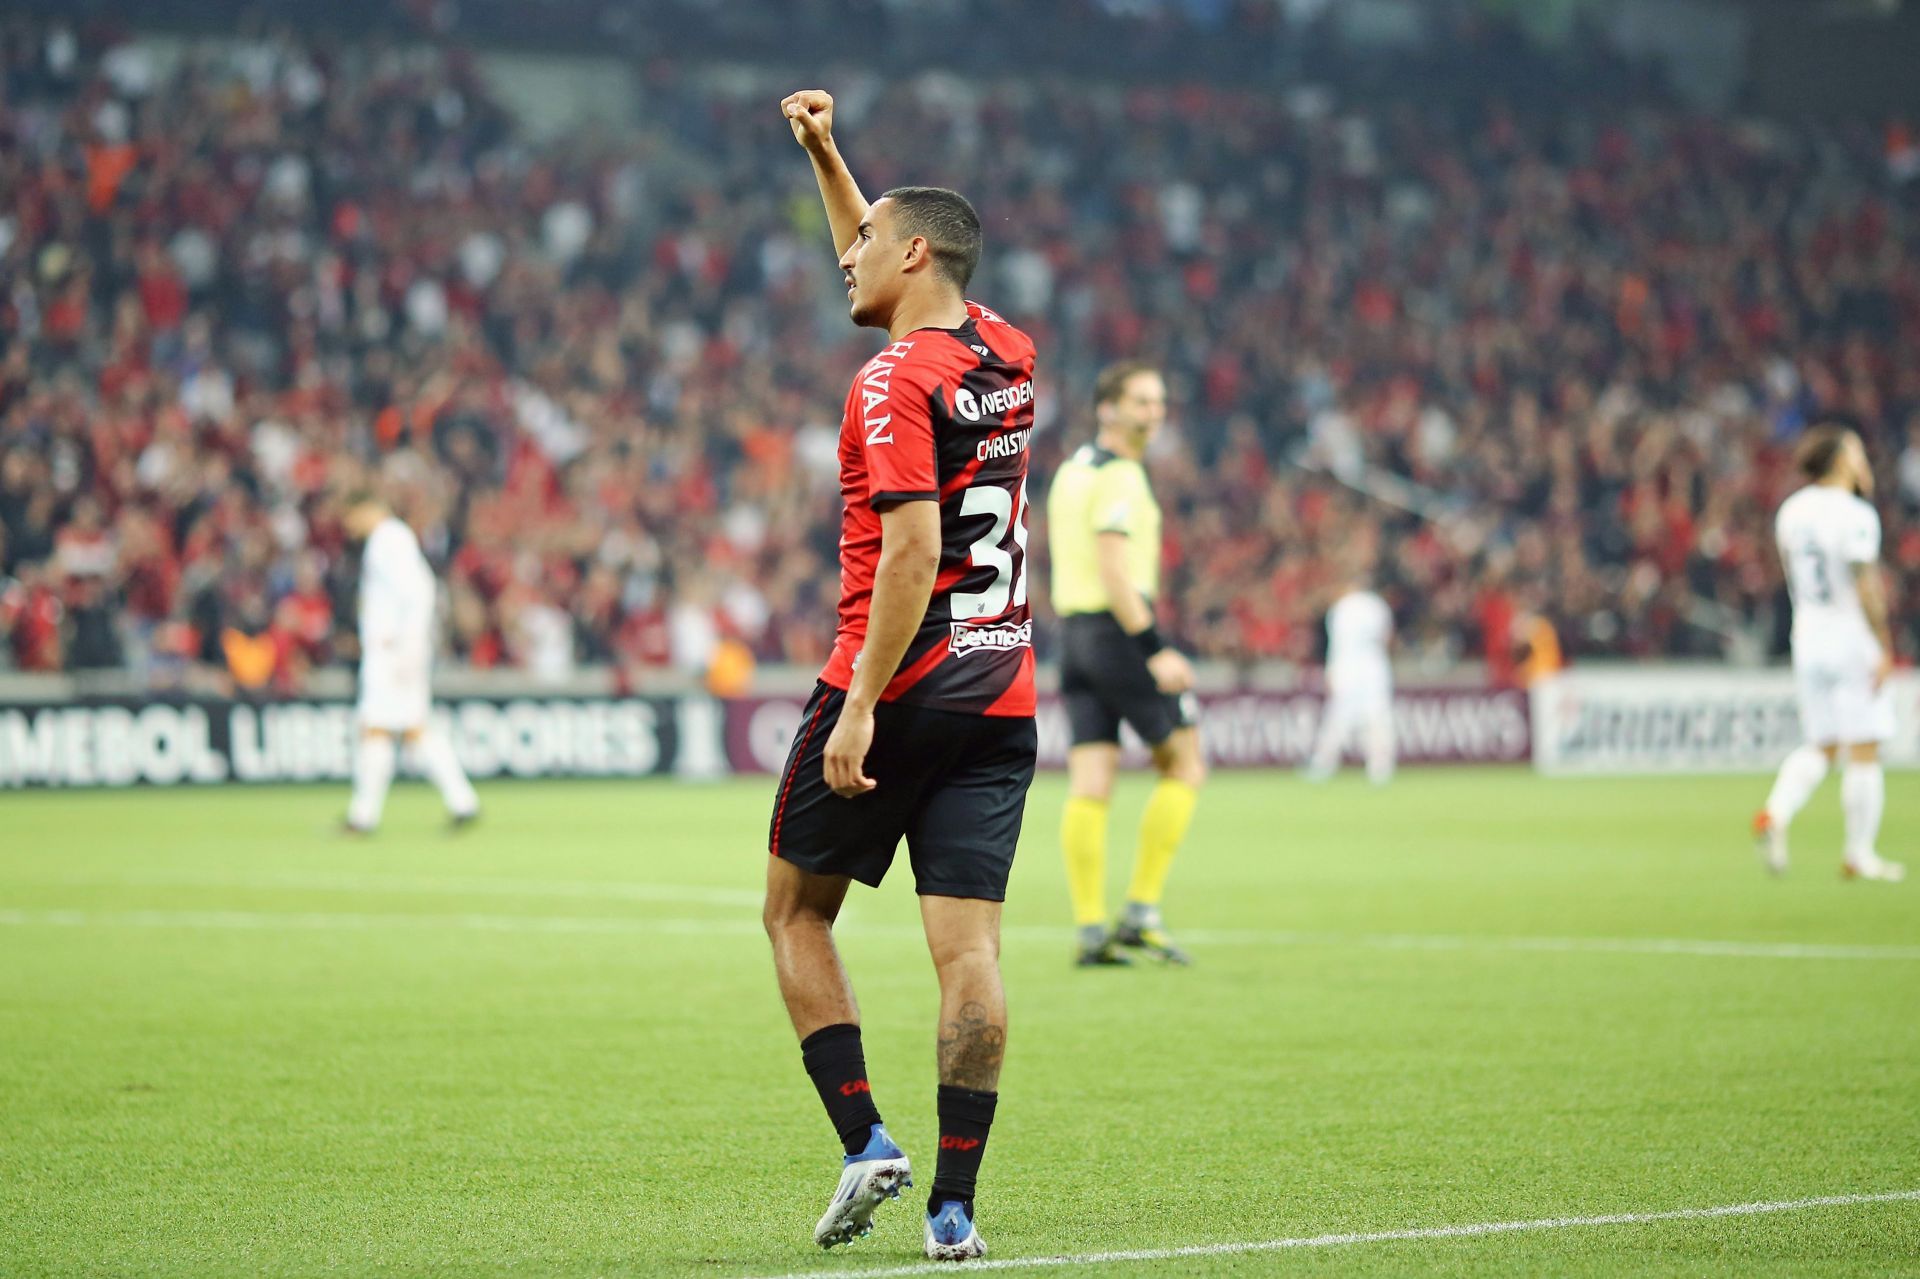 Athletico Paranaense and Estudiantes will square off on Friday.